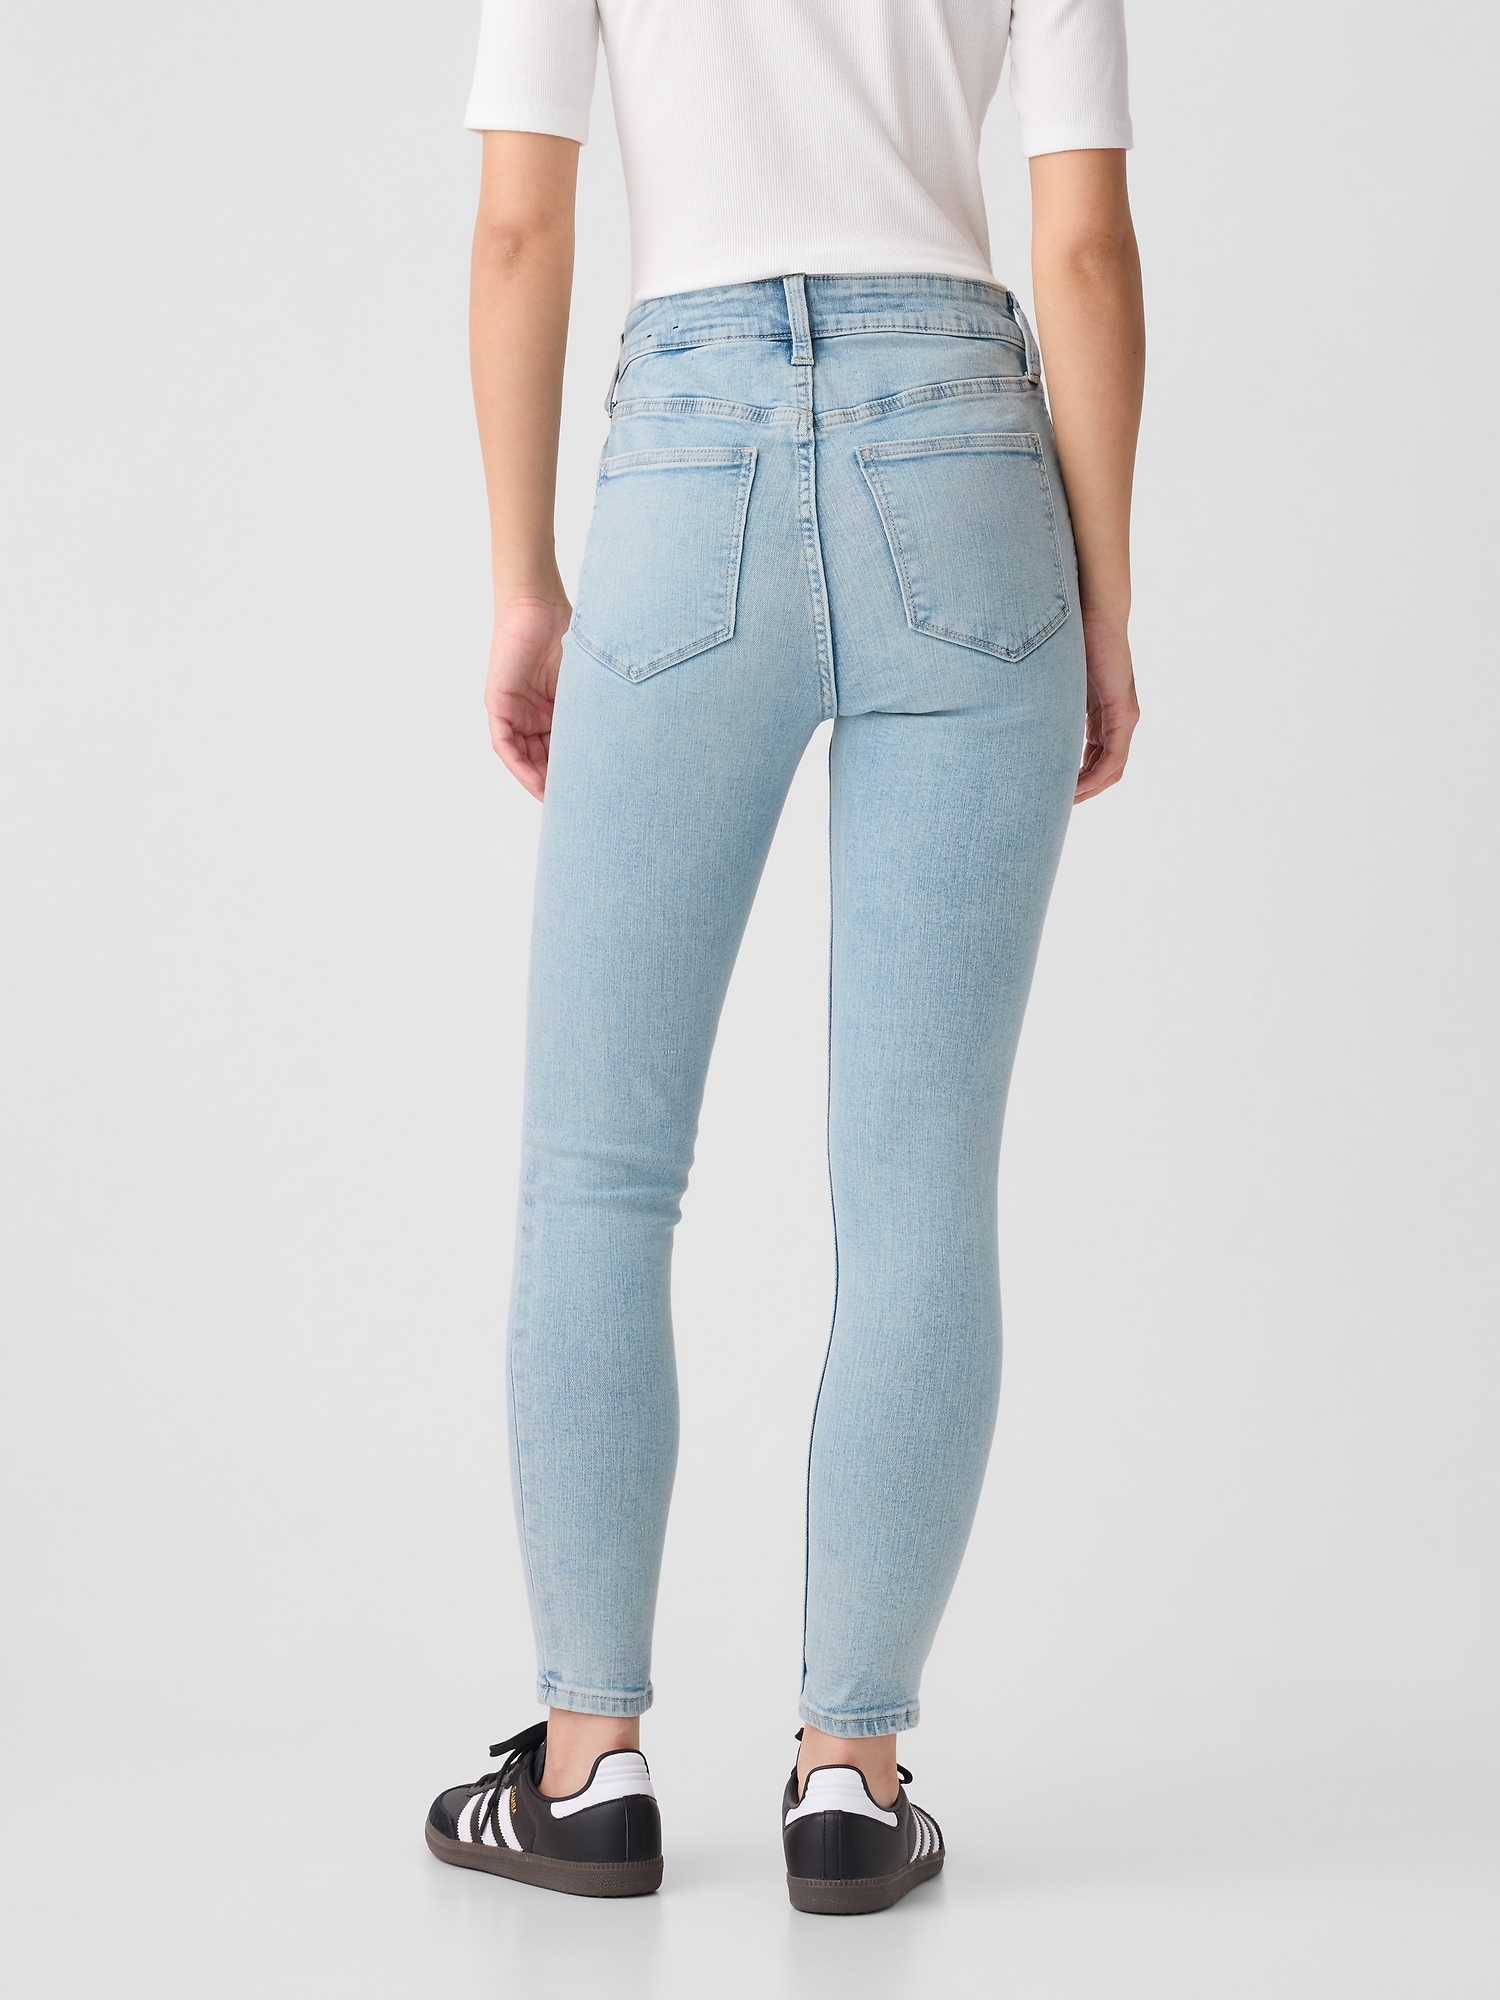 Buy Gap High Waisted Universal Legging Jeans from the Gap online shop